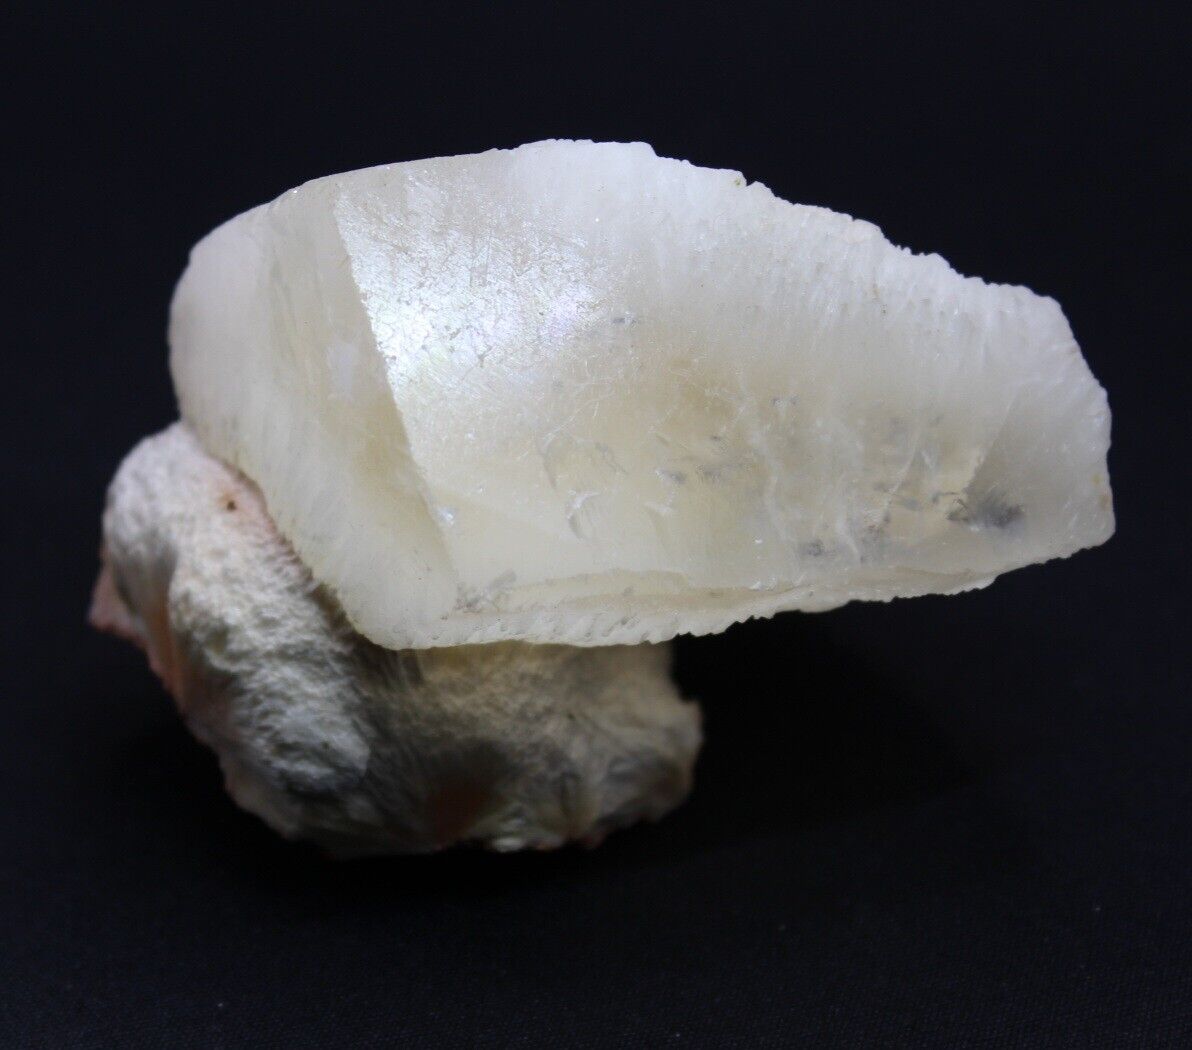 Large Gorgeous Calcite on Chalcedony Matrix Crystal Rock Raw Mineral 198.2g